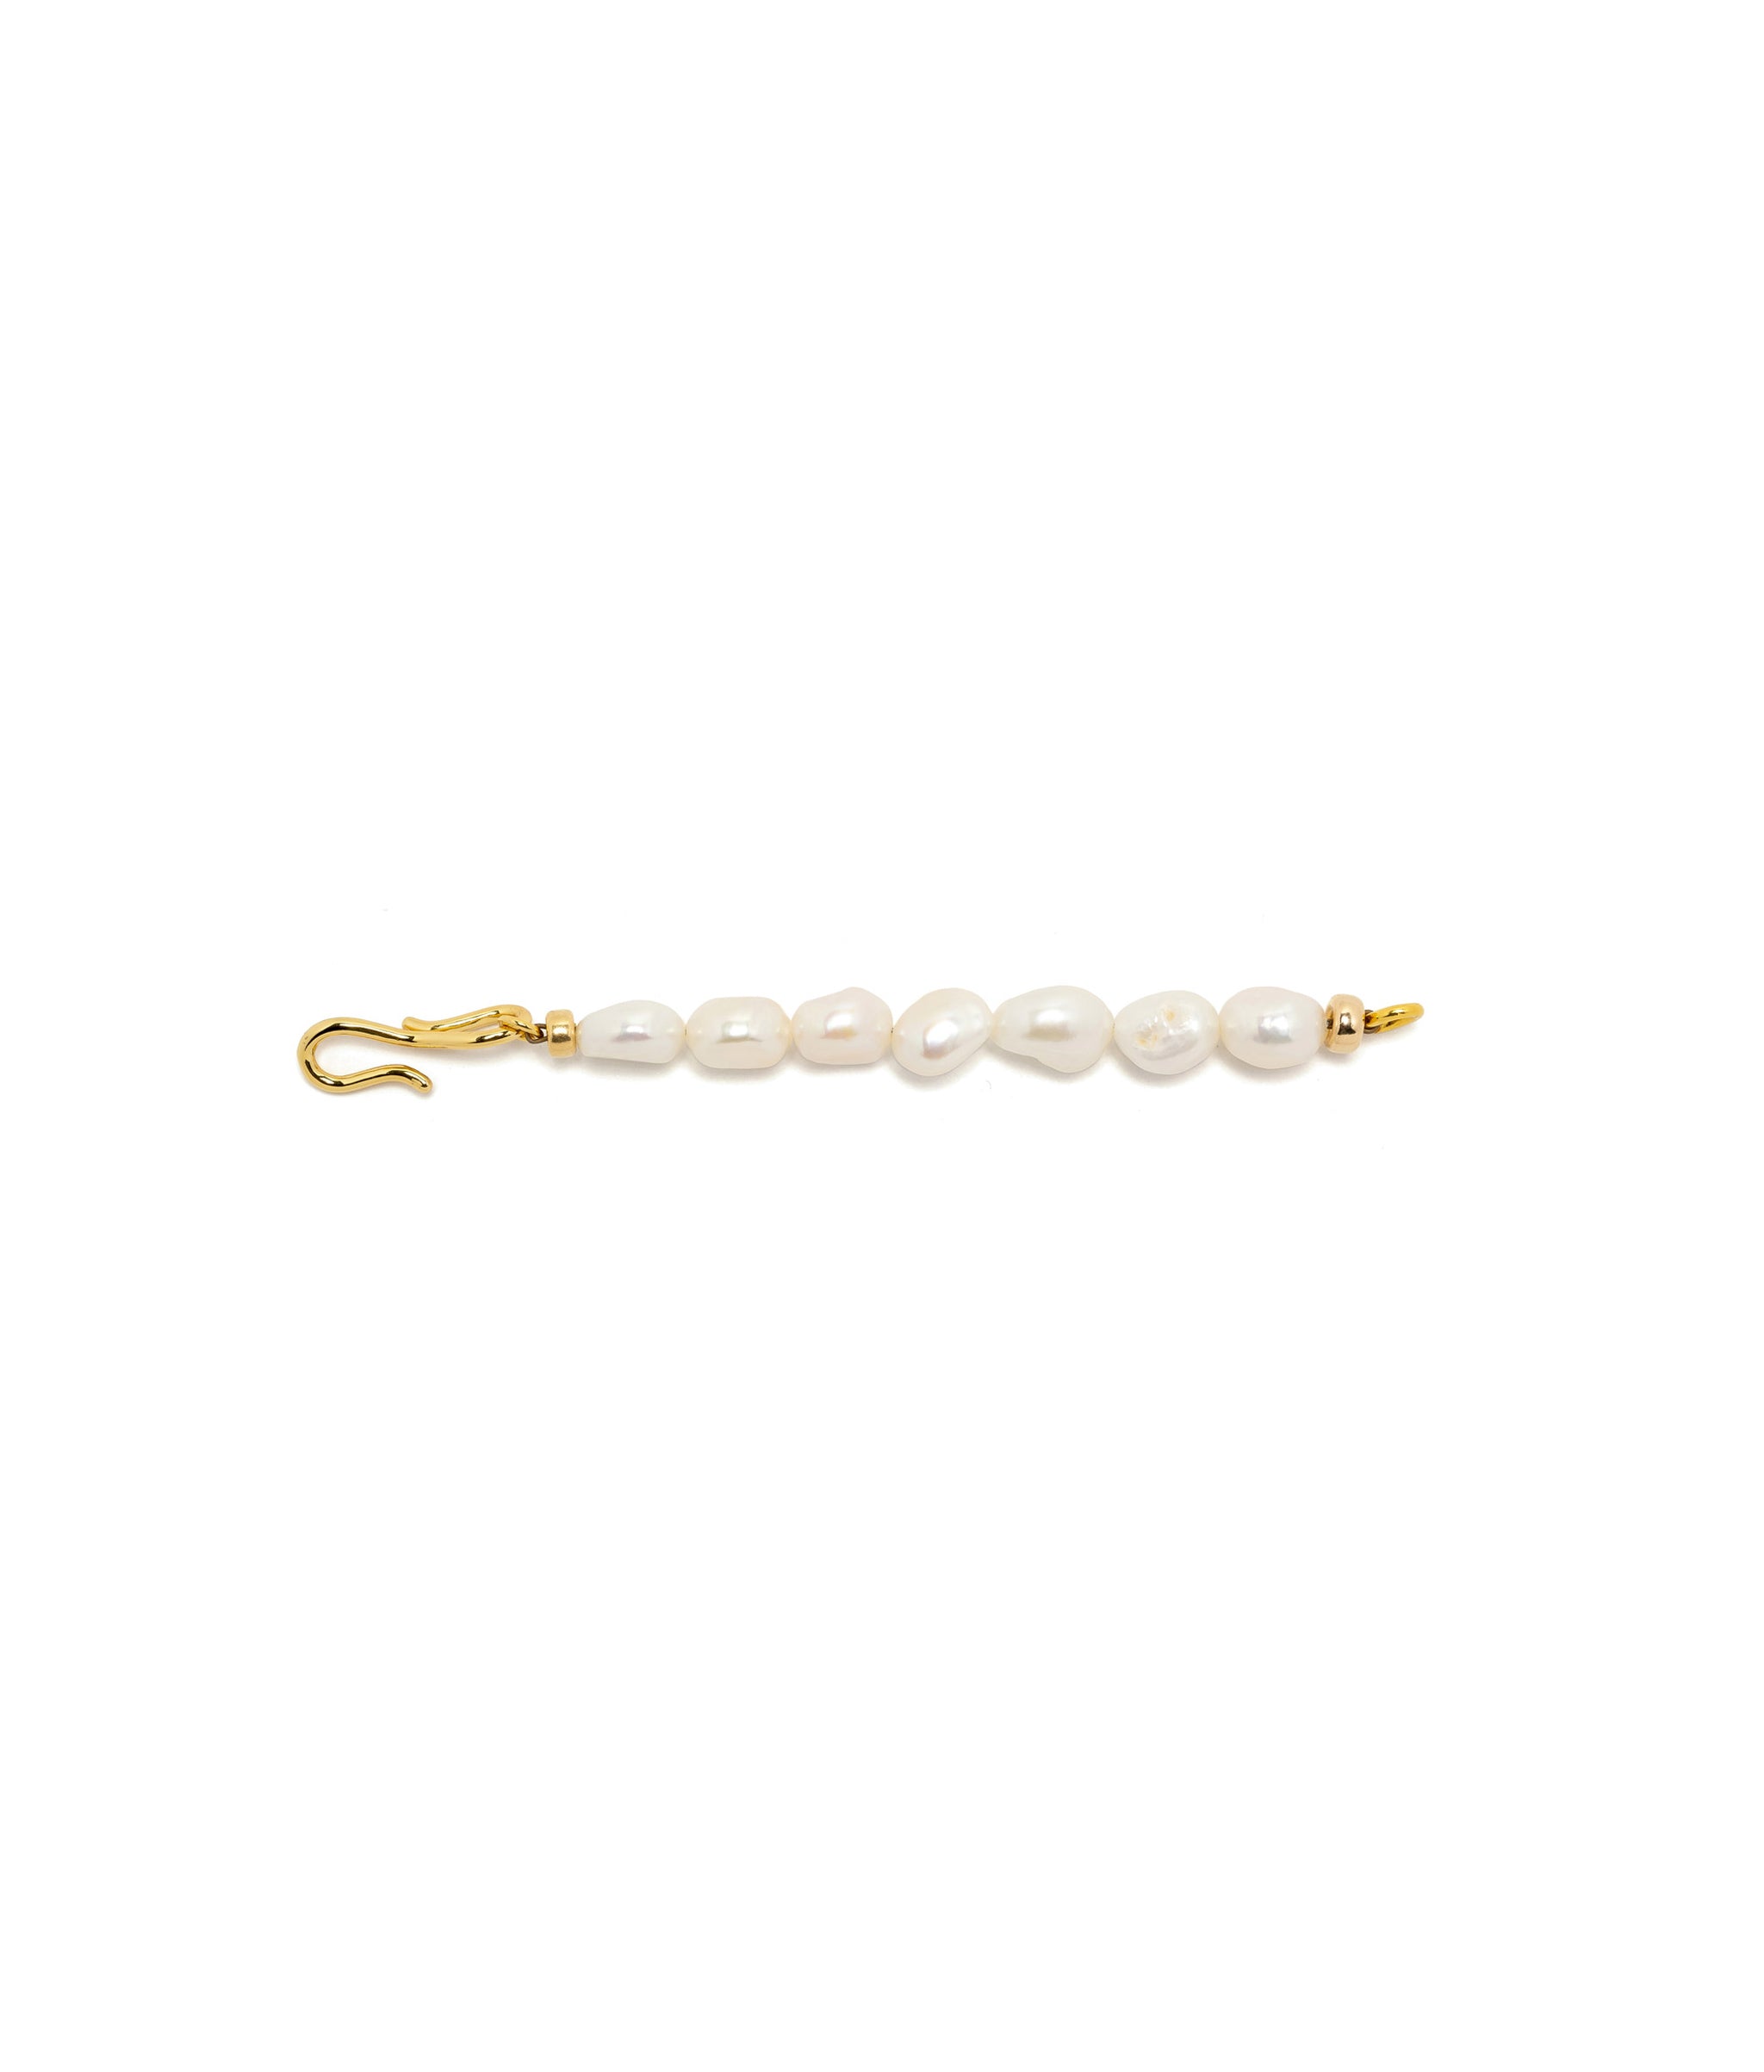 4.75" Pearl Extender. Gold-plated brass chain with pearls and S-hook, to lengthen your Lizzie Fortunato necklaces.